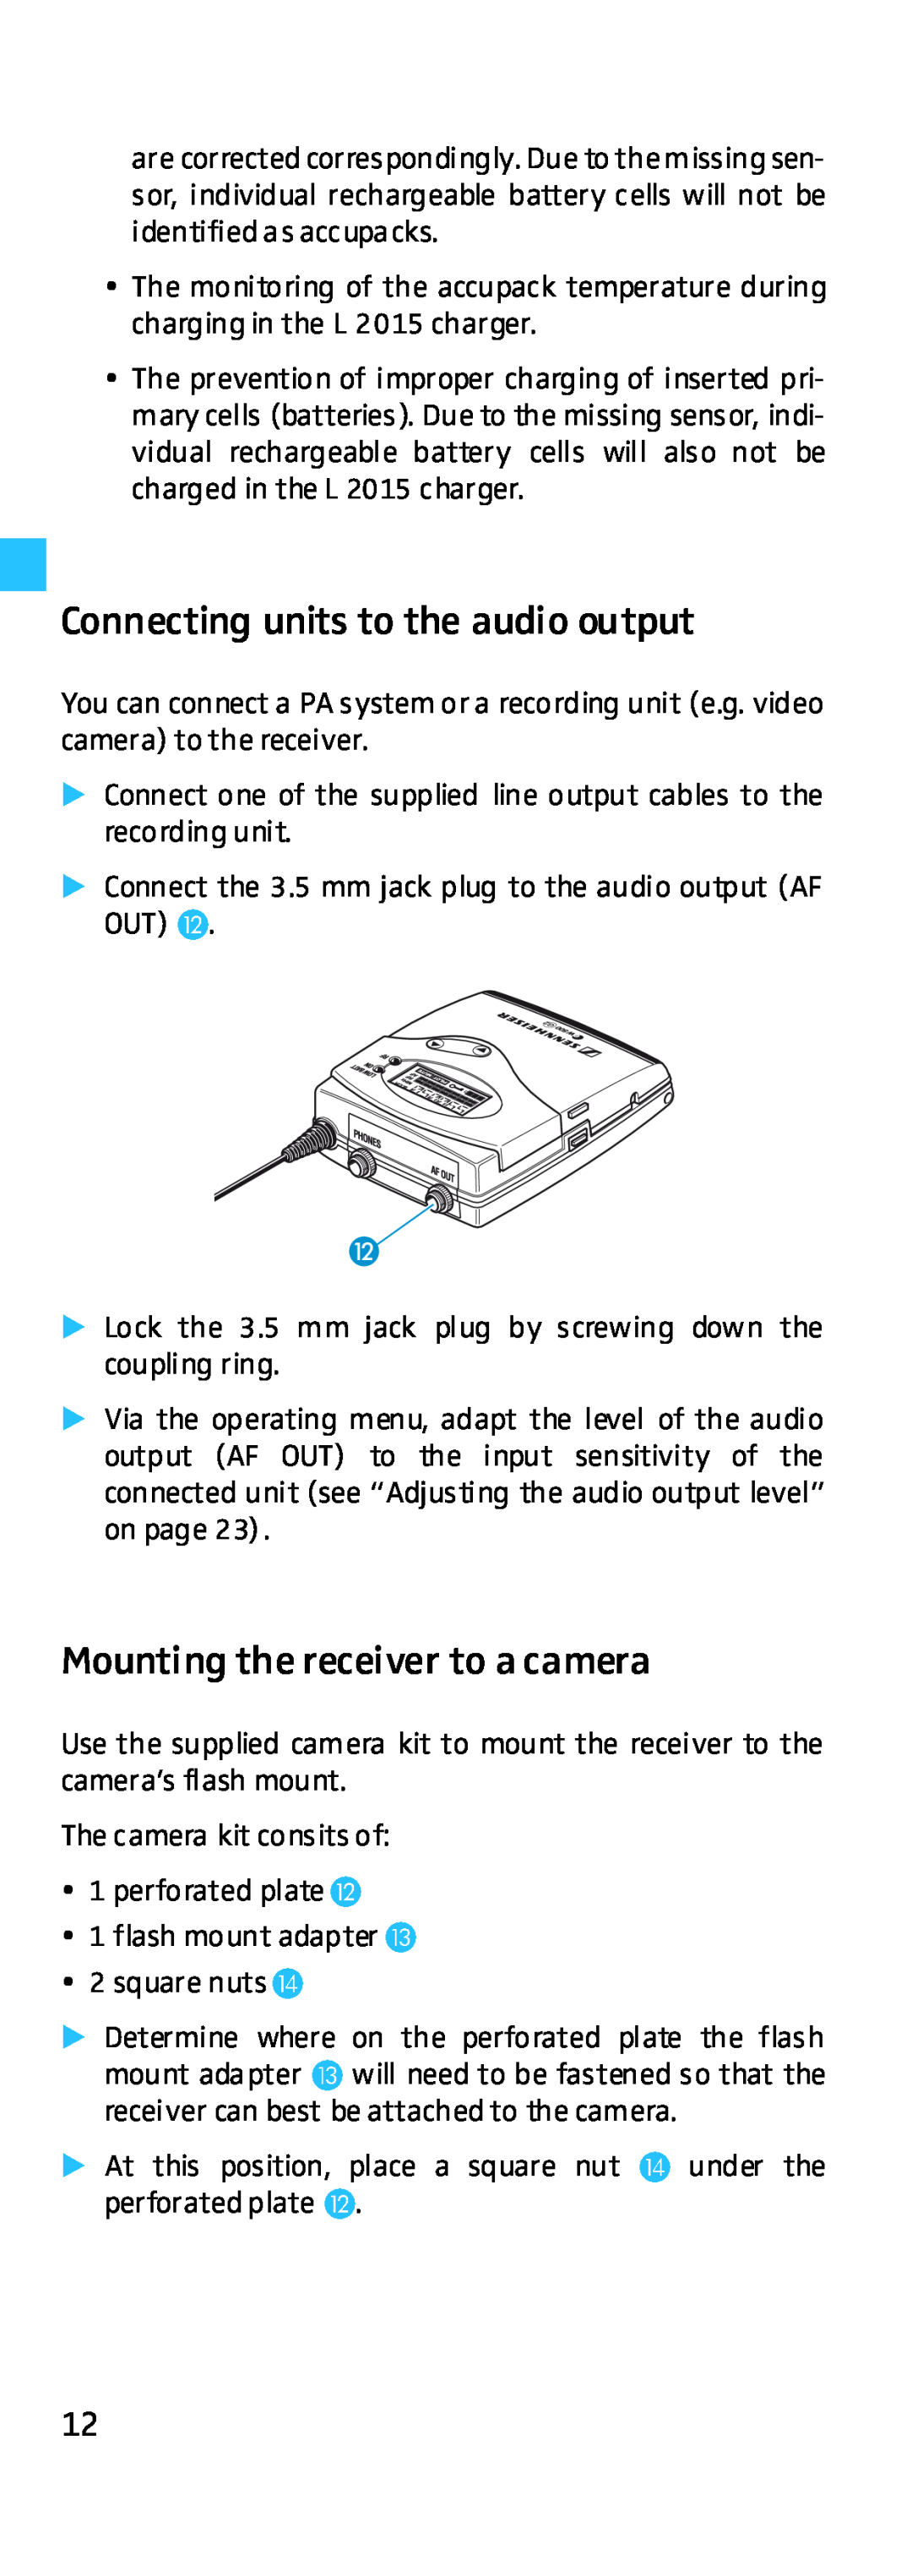 Sennheiser EK 500 G2 manual Connecting units to the audio output, Mounting the receiver to a camera 